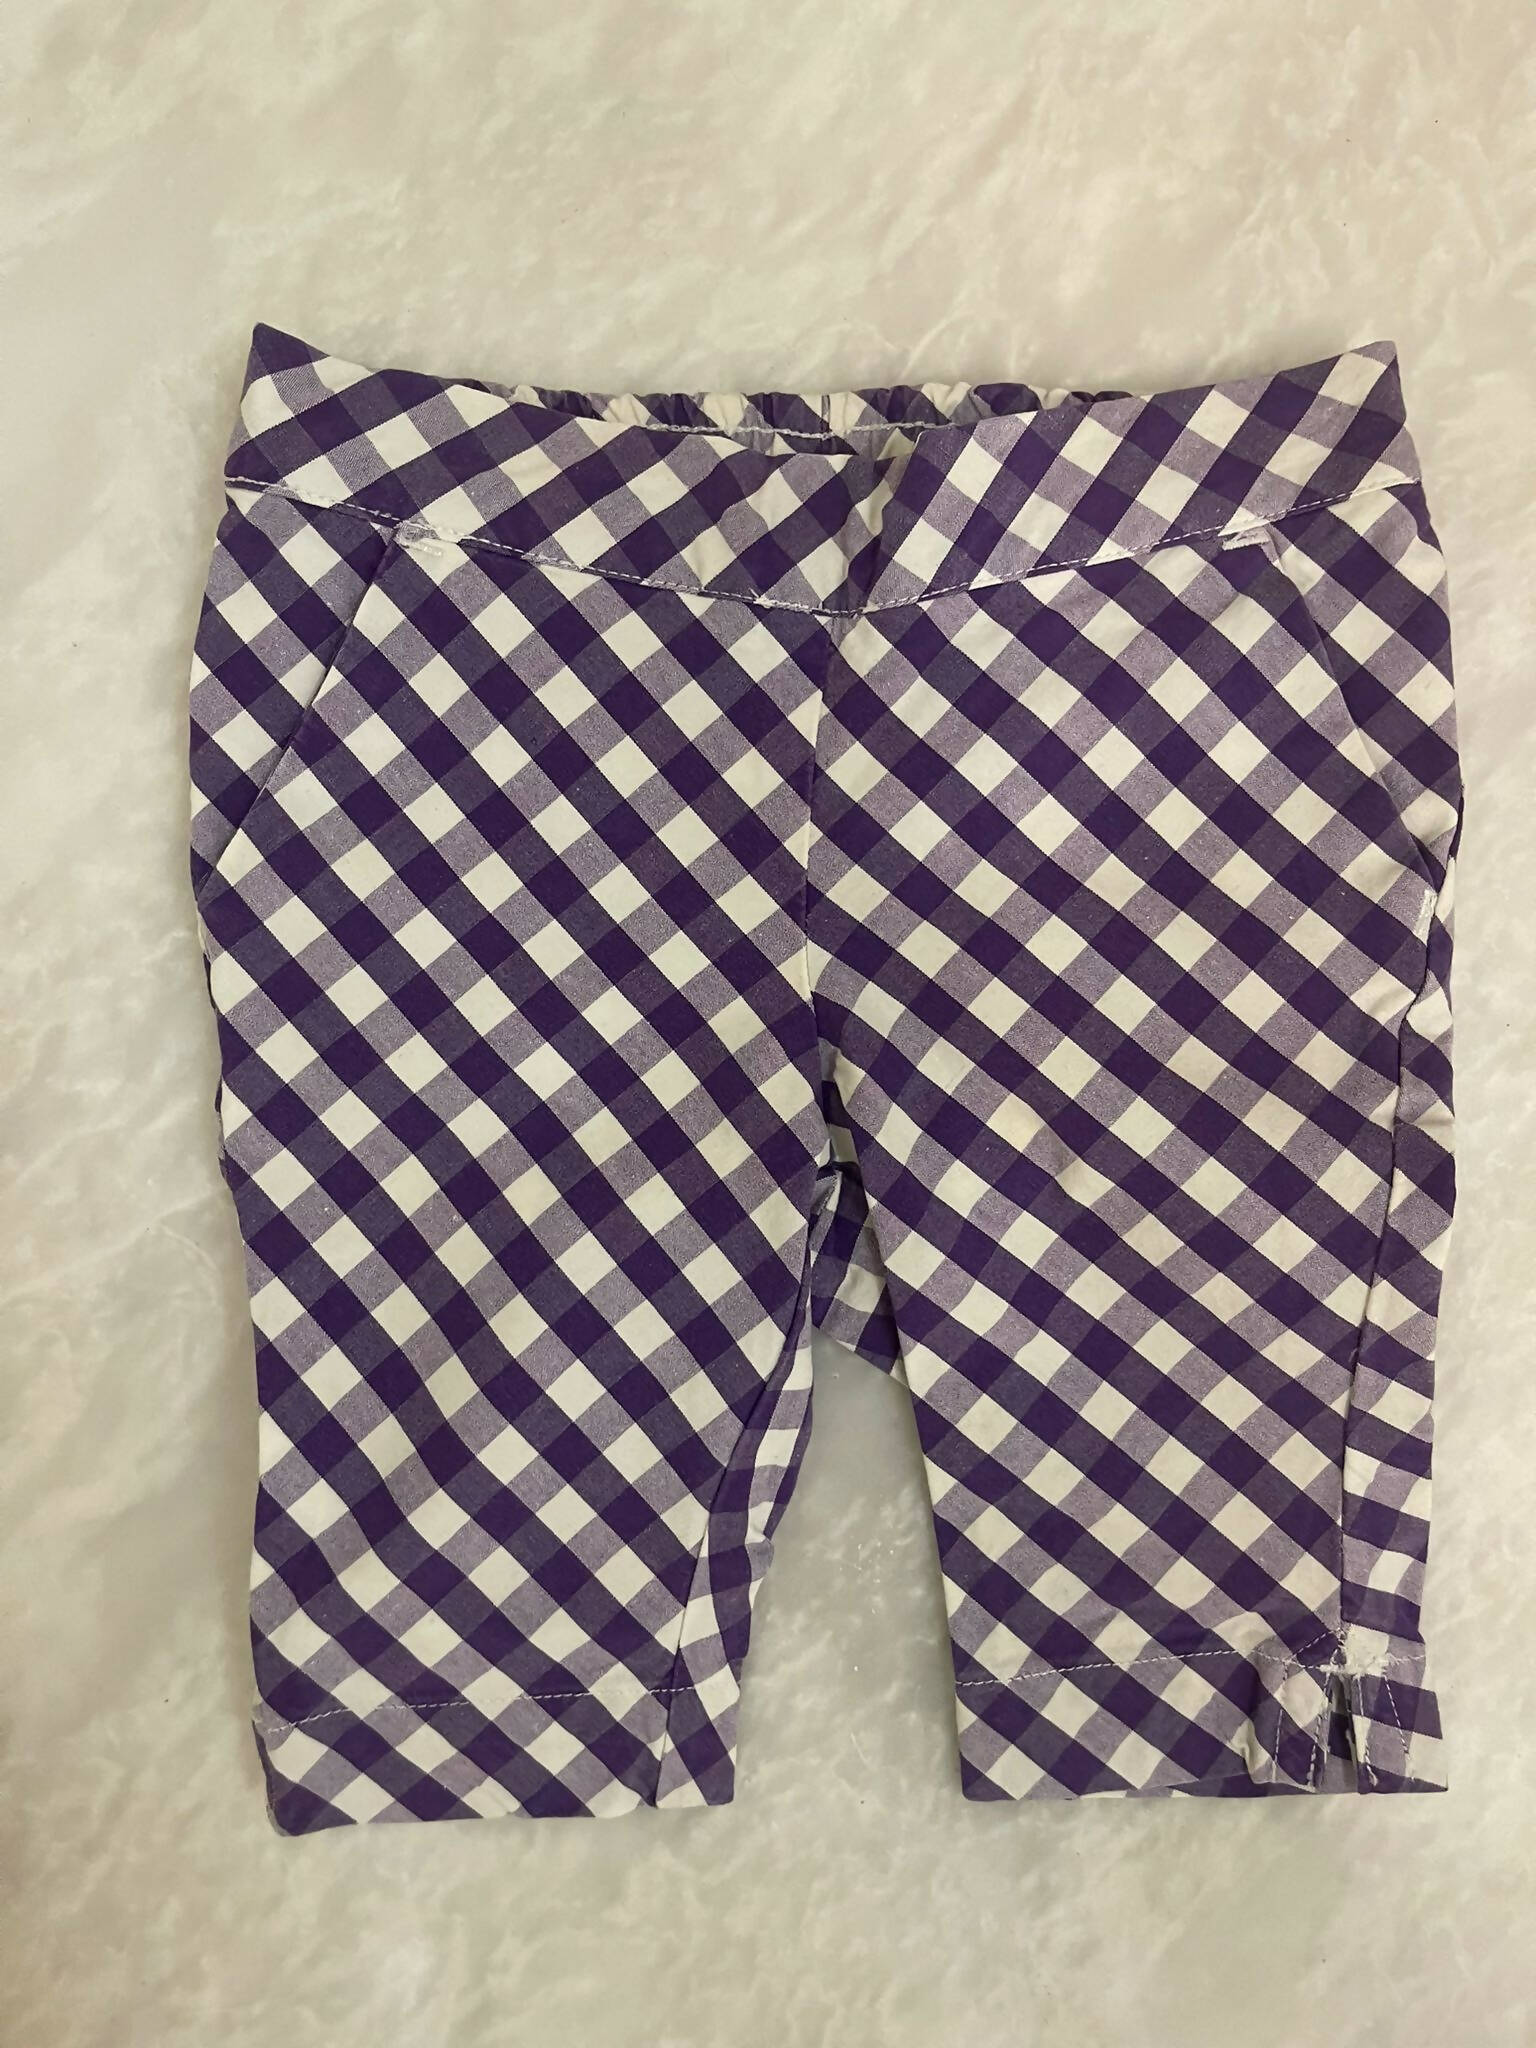 Checked Purple Shorts | Girls Bottoms & Pants | Preloved